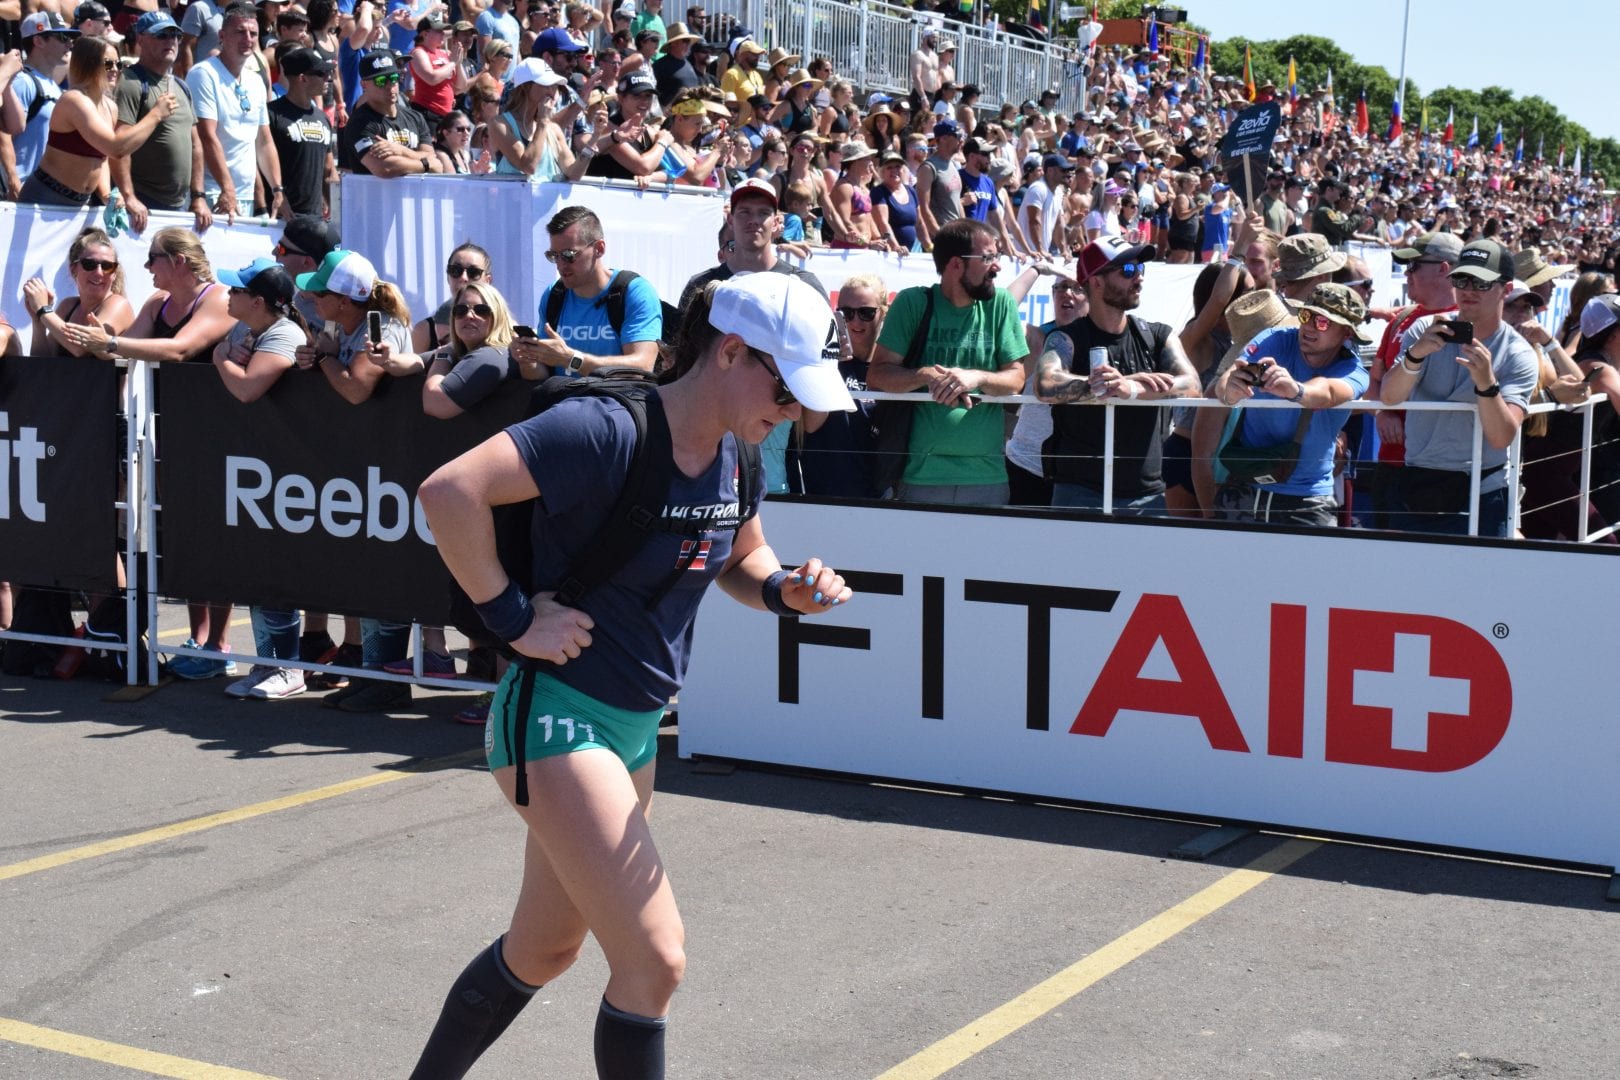 Jacqueline Dahlstrøm competes in the Ruck Run event at the 2019 CrossFit Games.